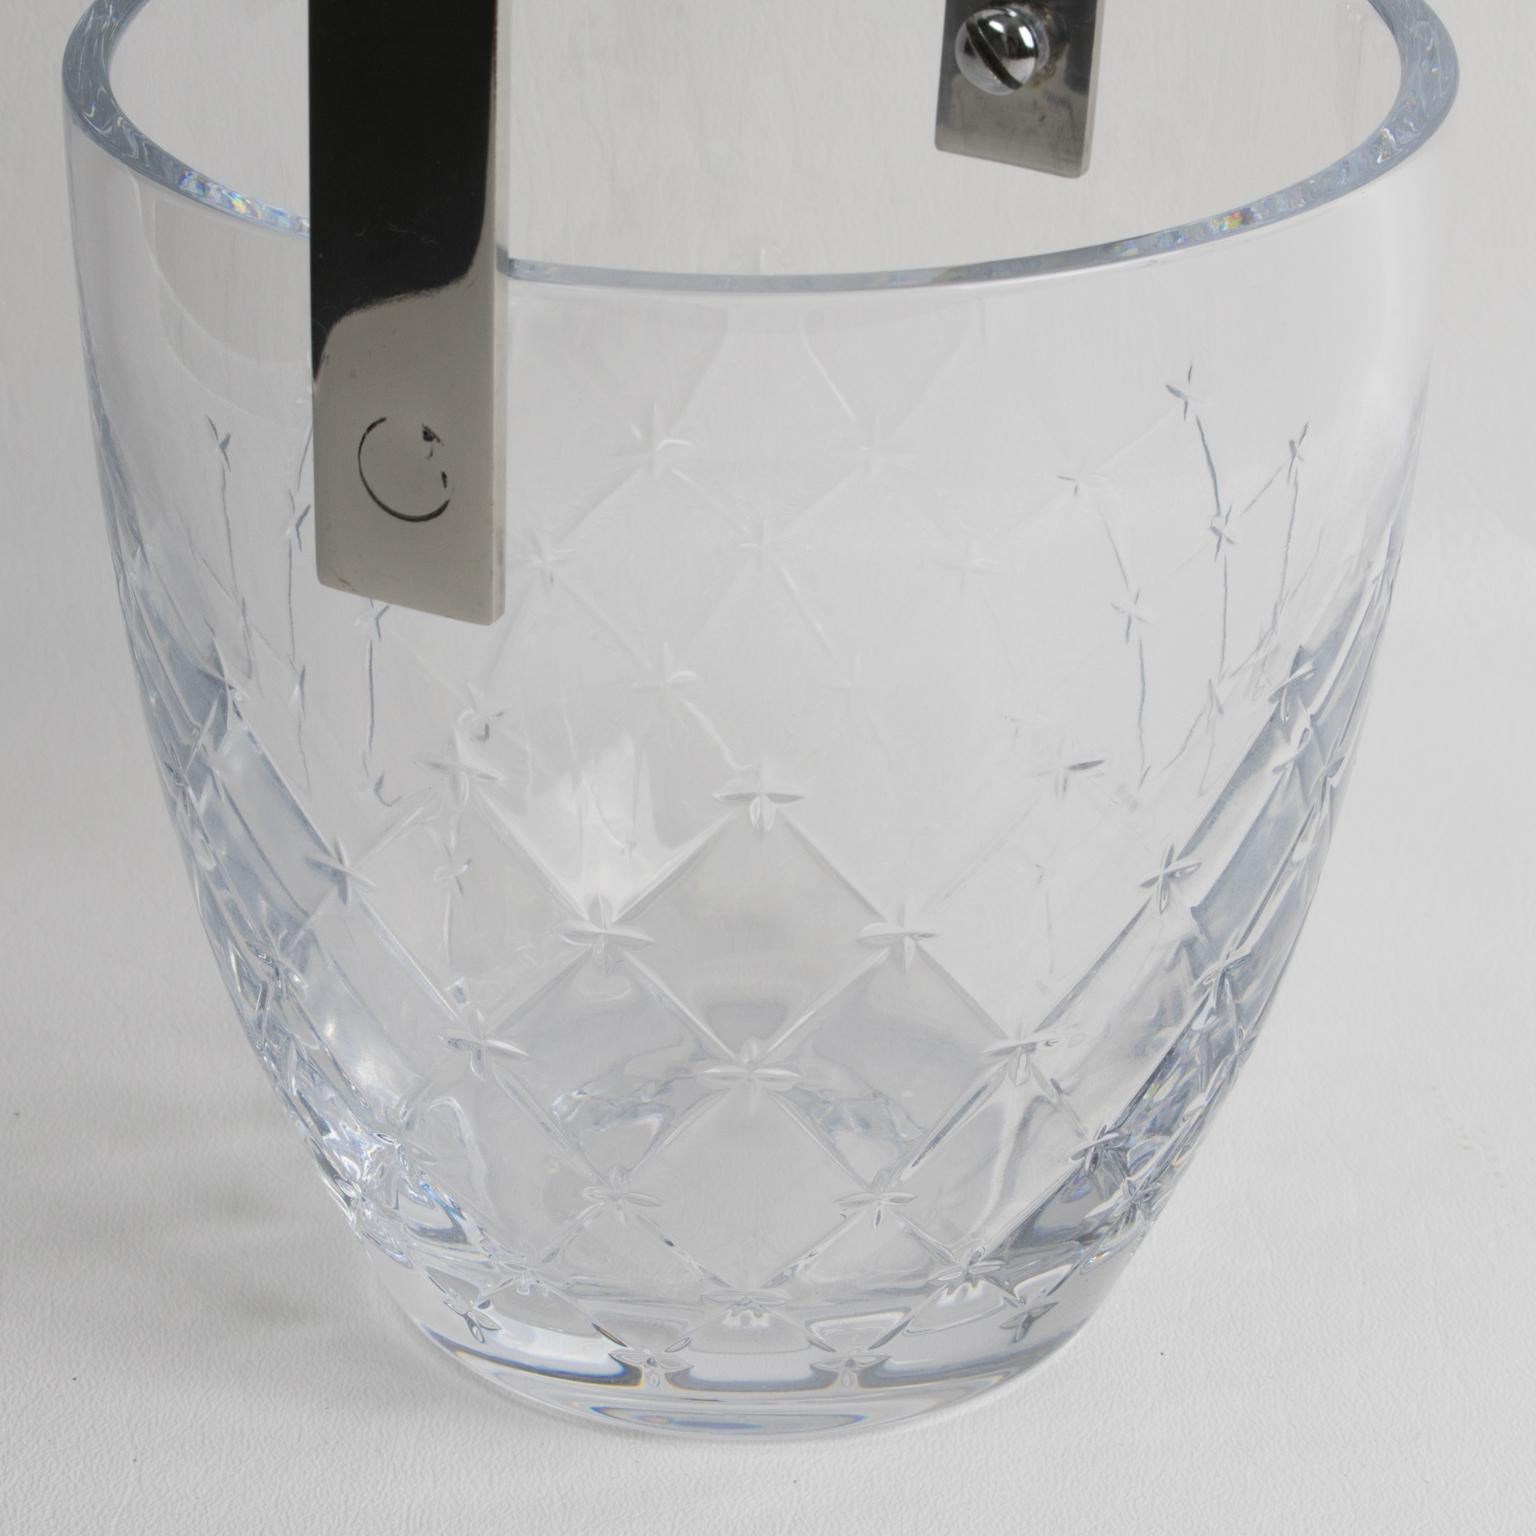 Christian Dior Ice Bucket Cooler Etched Crystal and Stainless Steel 11